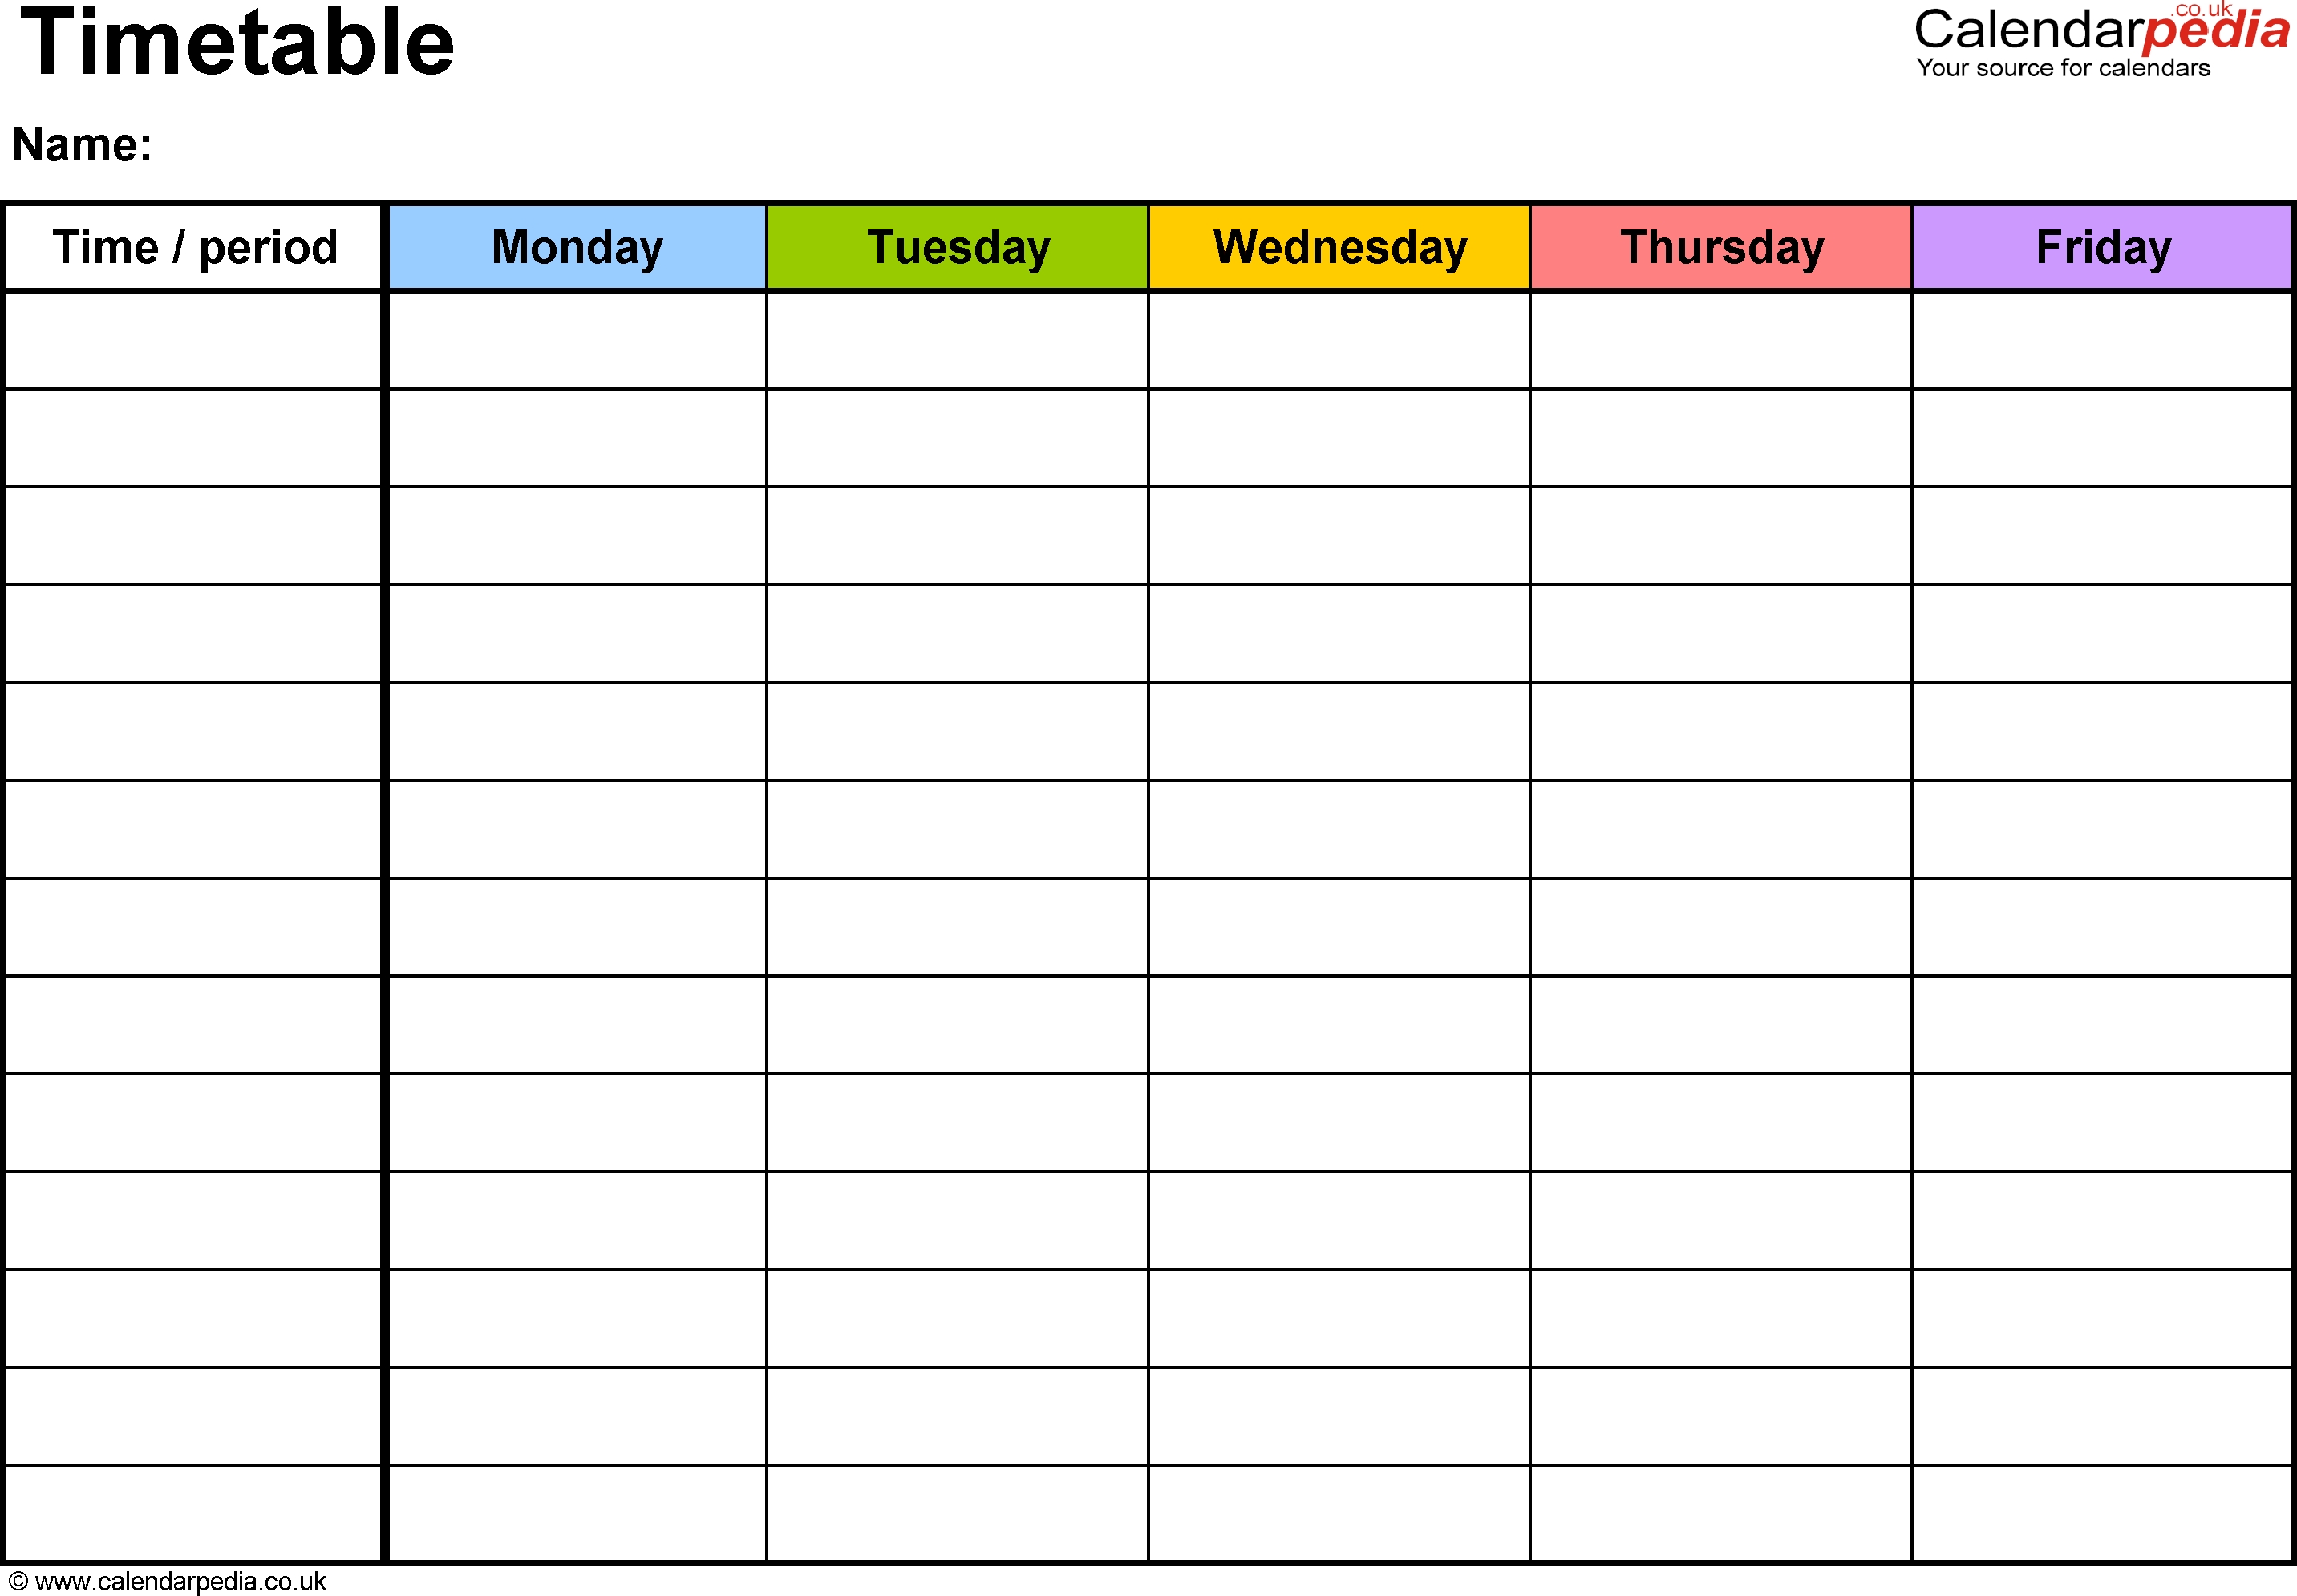 Pdf Timetable Template 2: Landscape Format, A4, 1 Page-Template Monday To Friday